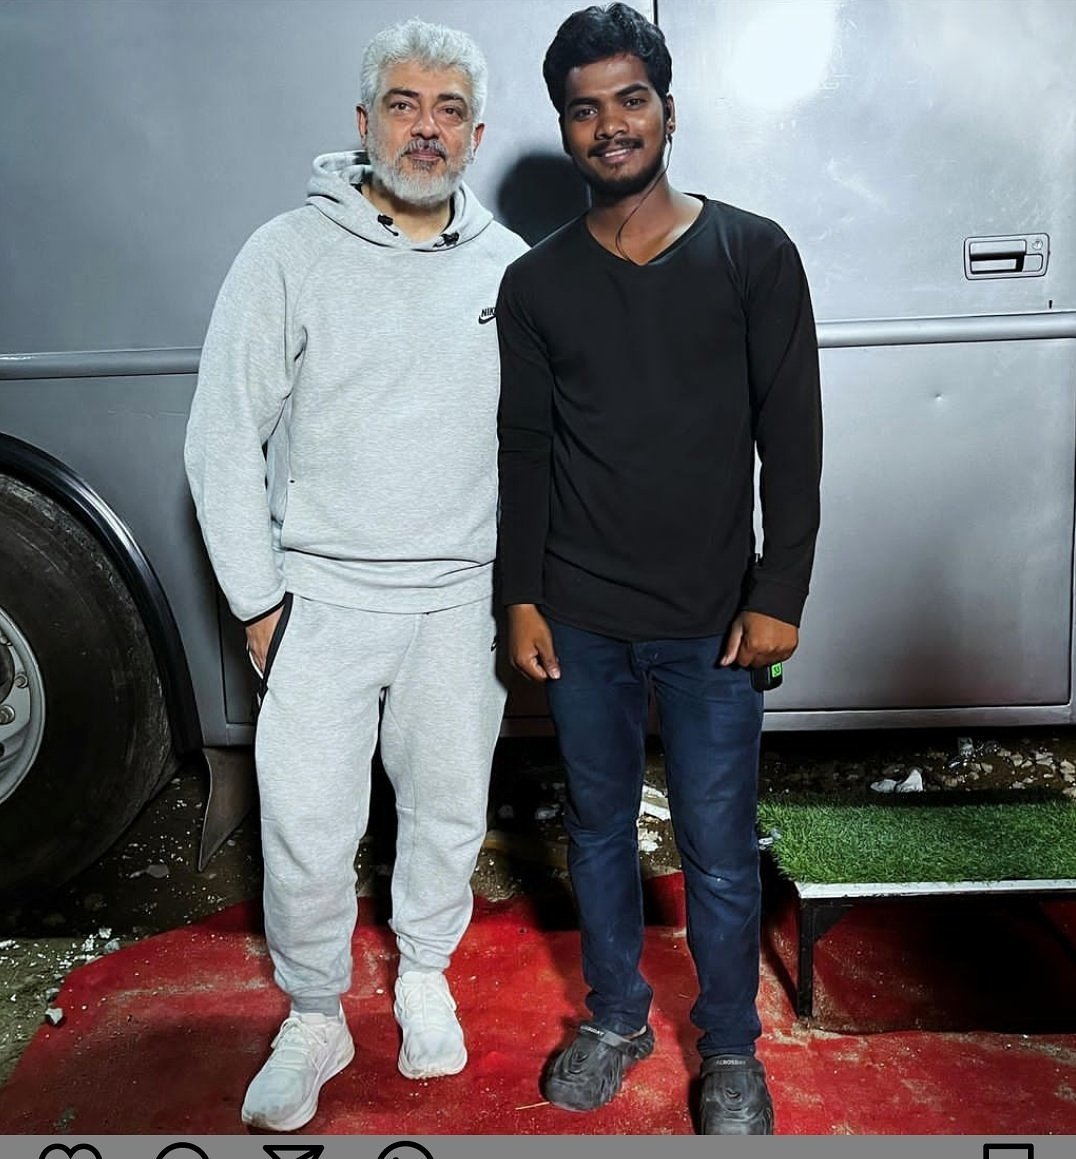 Another latest pic of Thala Ajith from the sets of GOOD BAD UGLY 🌋🔥 #Ajithkumar #GoodBadUgly